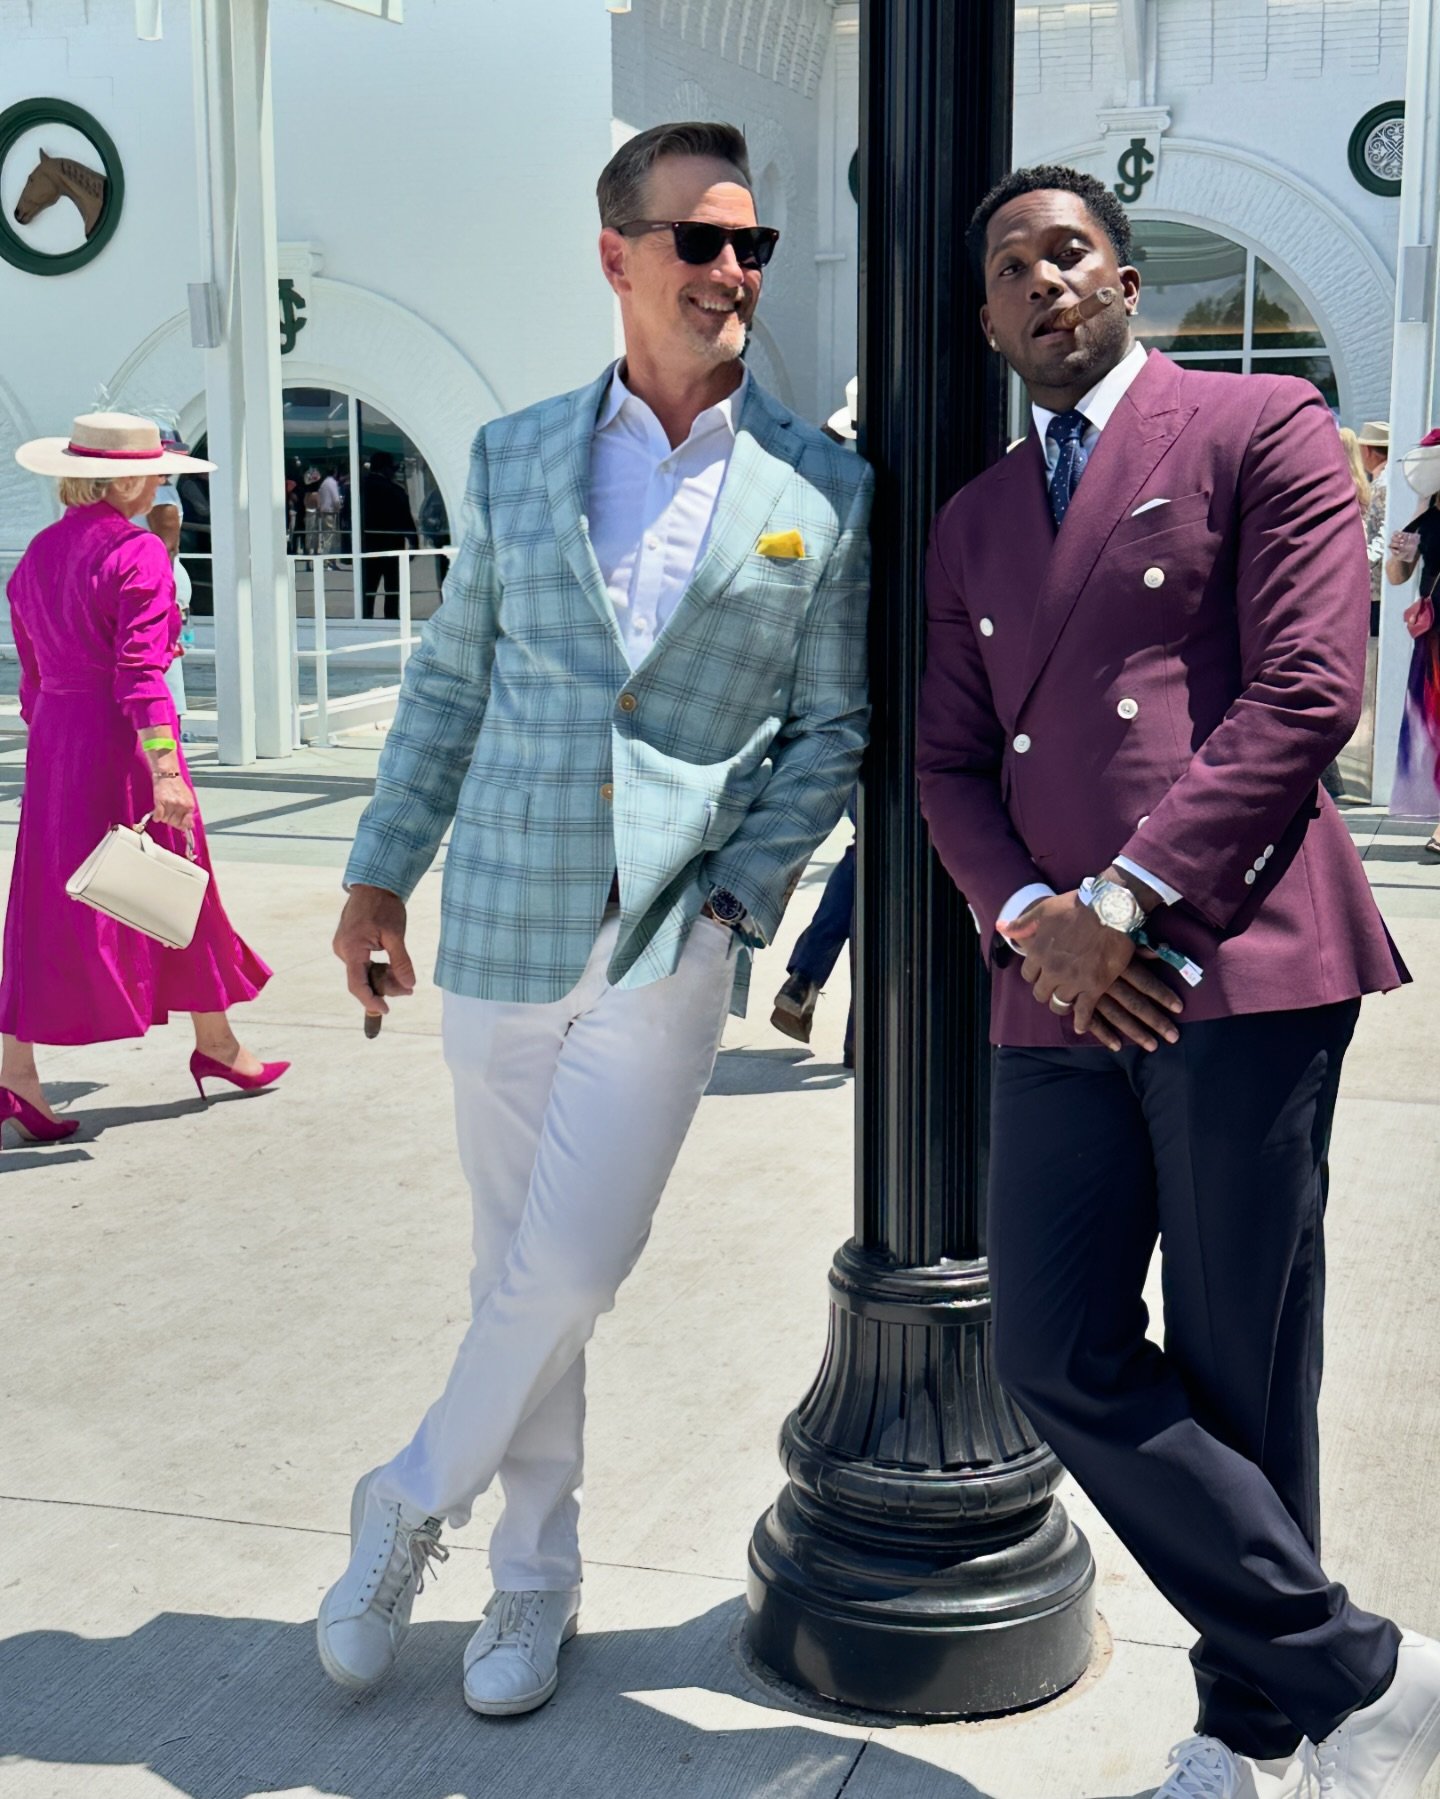 Elegance meets tradition at the Kentucky Derby, where tailored looks make a statement trackside. #silverfoxlabel #kentuckyderby 🏇